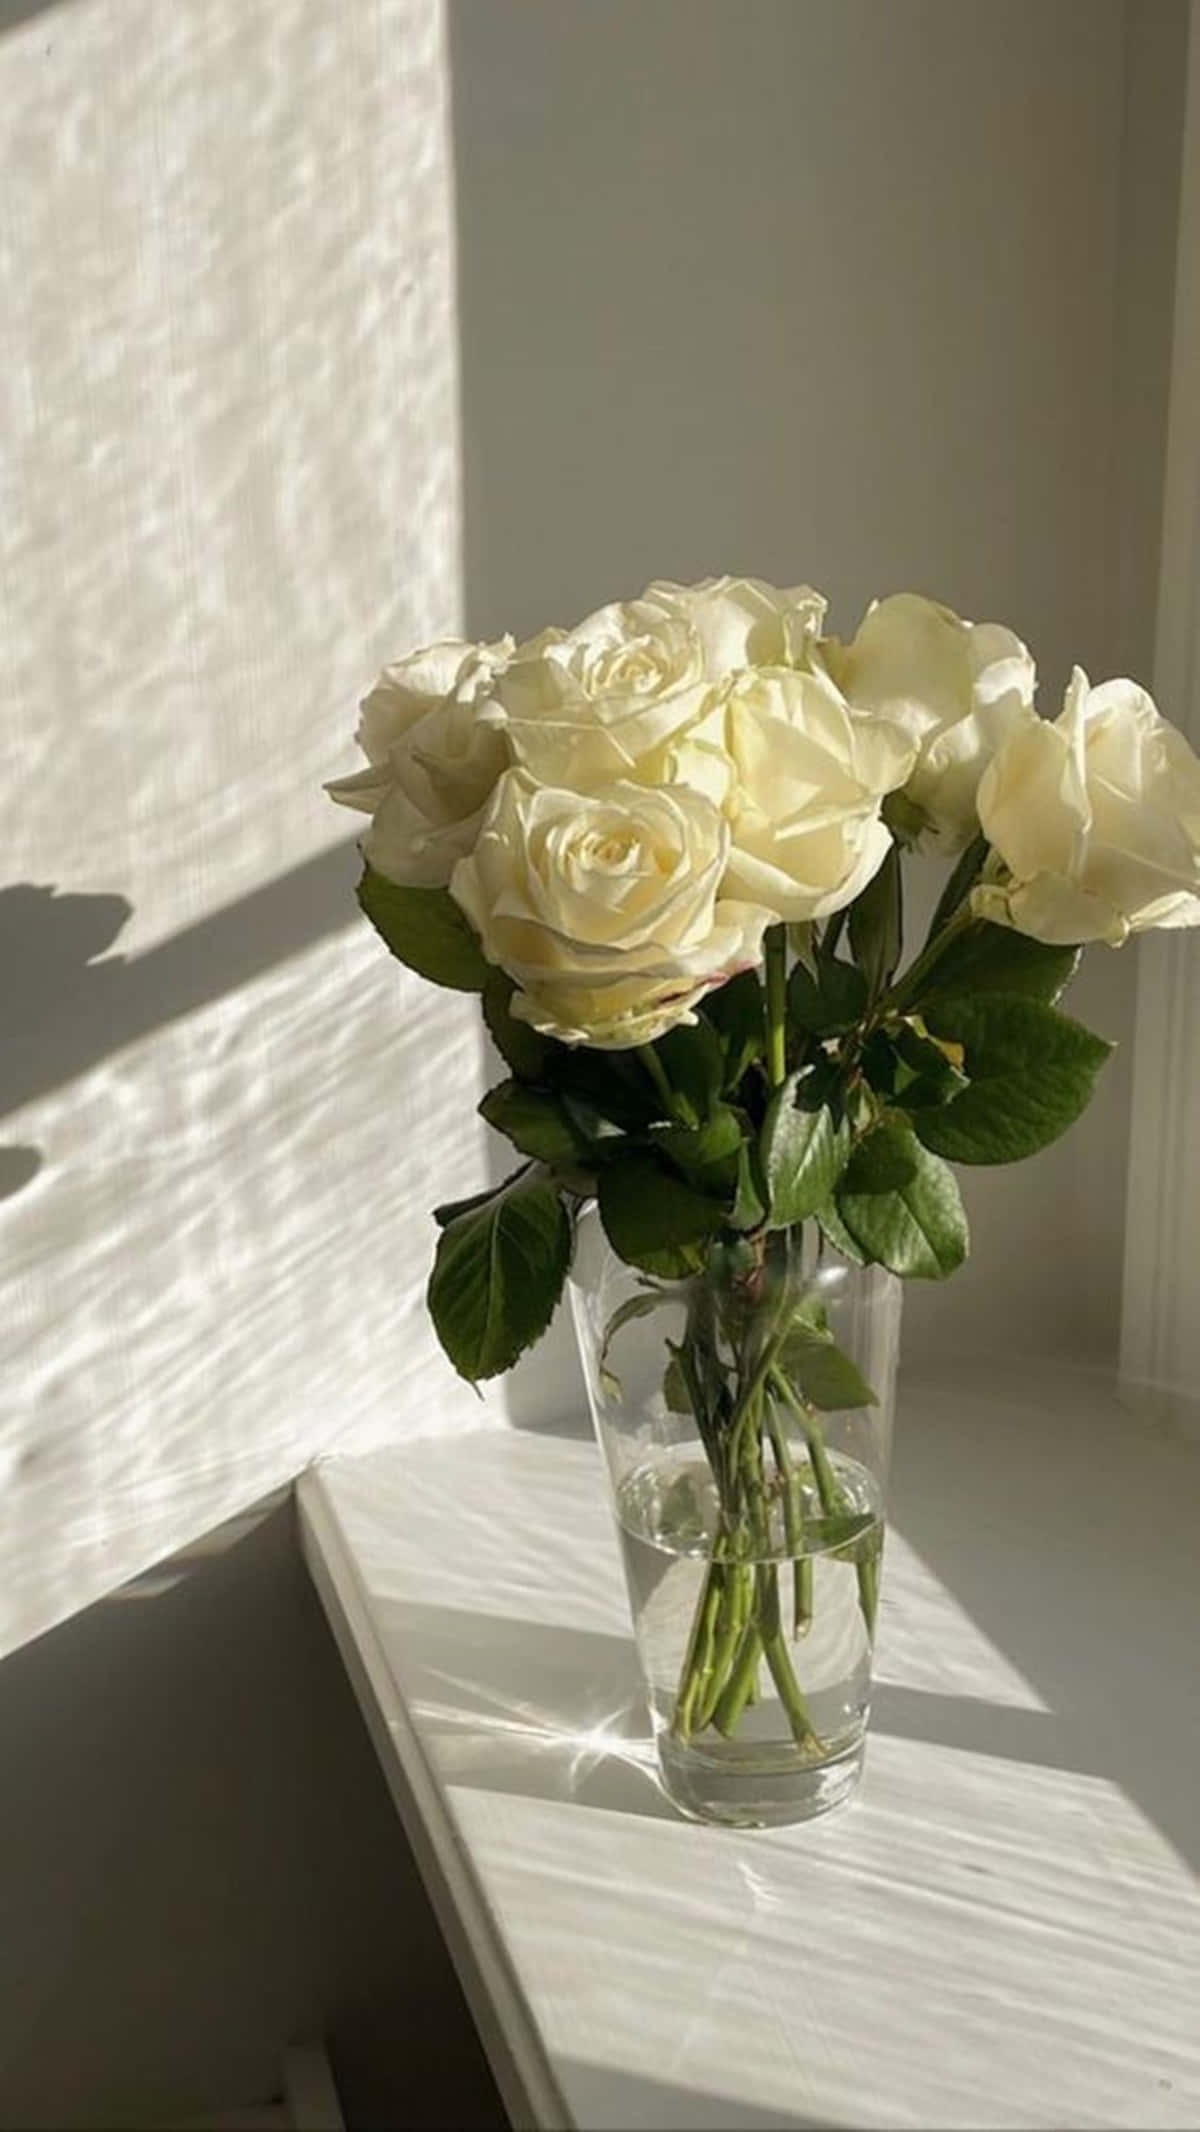 Download Majestic Aesthetic Of A White Rose Wallpaper 4284